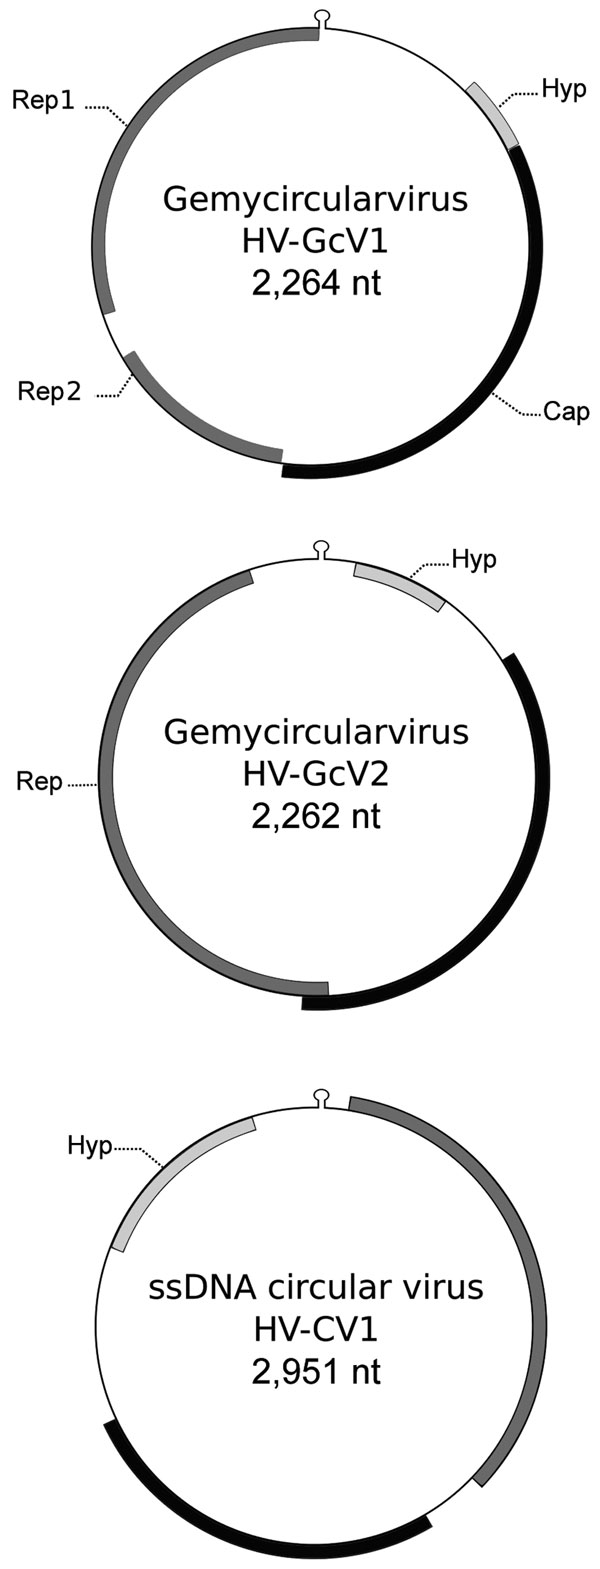 Genomic features of gemycircularviruses HV-GcV1 and HV-GcV2 and of a novel circular single-stranded DNA (ssDNA) virus, HV-CV1, including hairpin structure and predicted open reading frames. Cap, capsid; Hyp, hypothetical protein with unknown function; Rep, replication initiation protein.